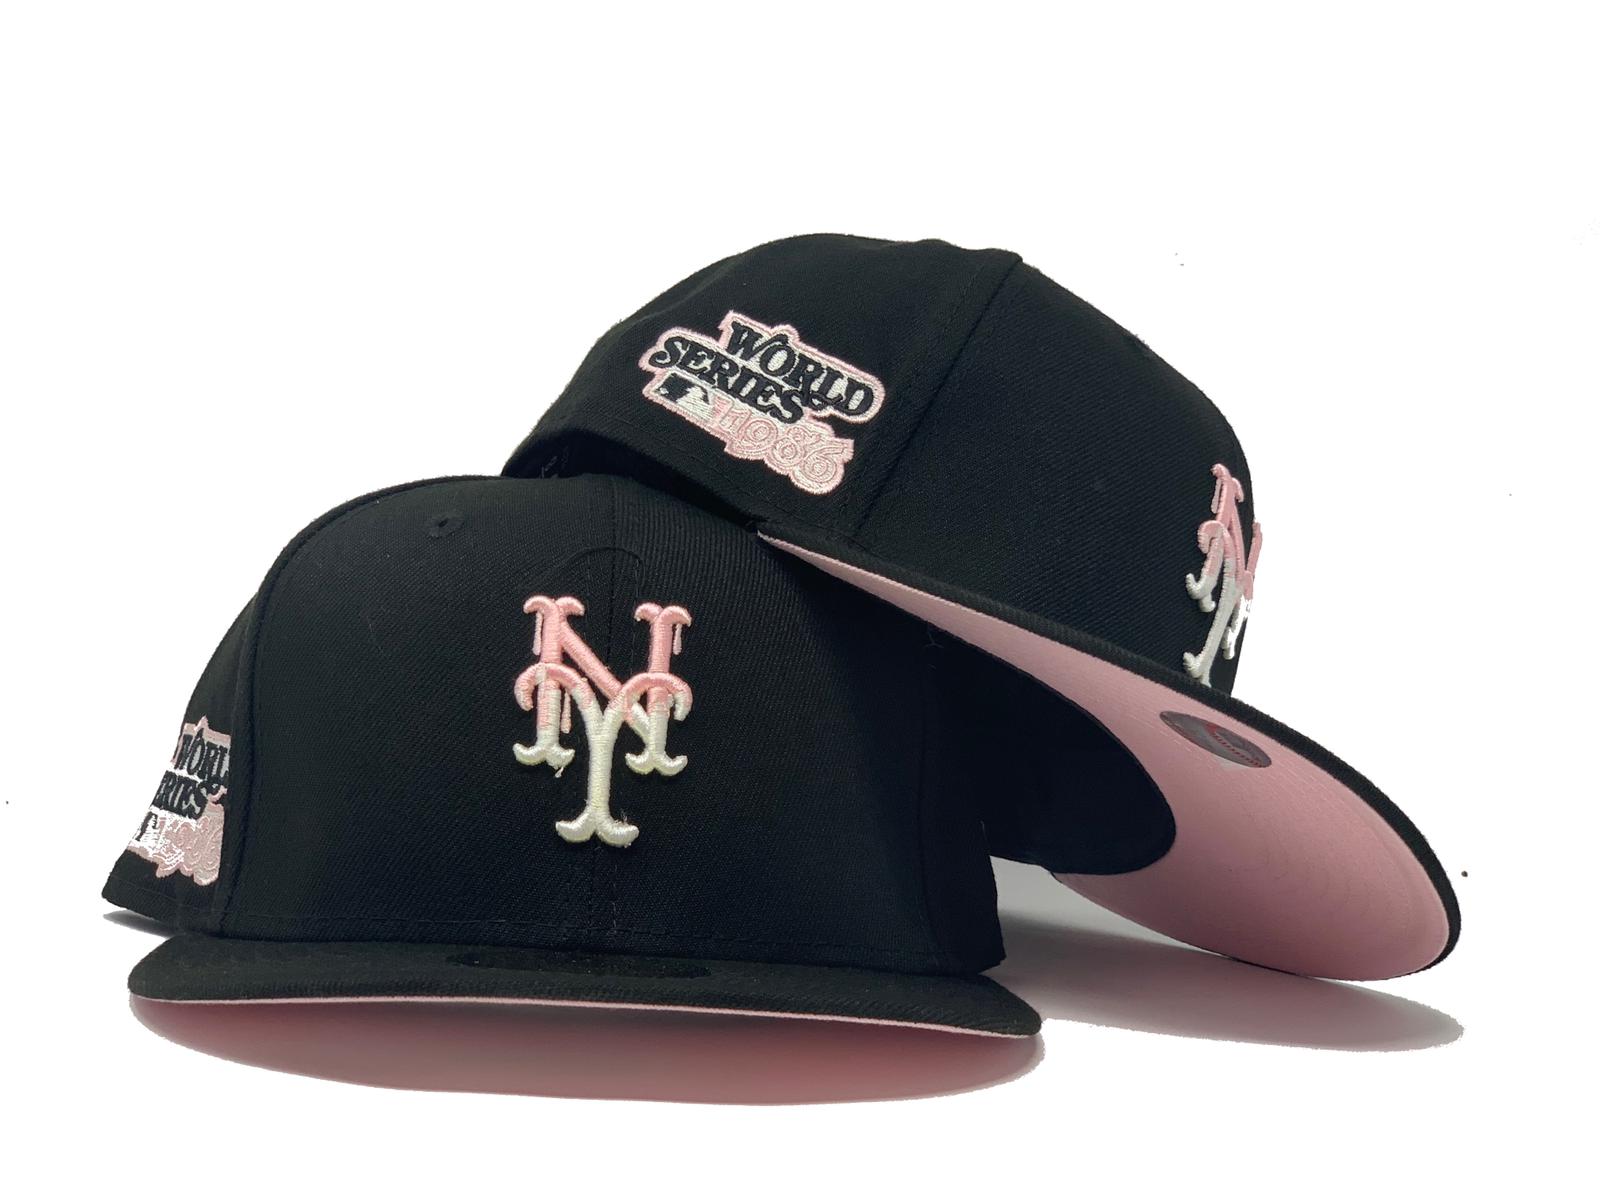 Black and fuchsia New York cap with small spots of hyper original paint